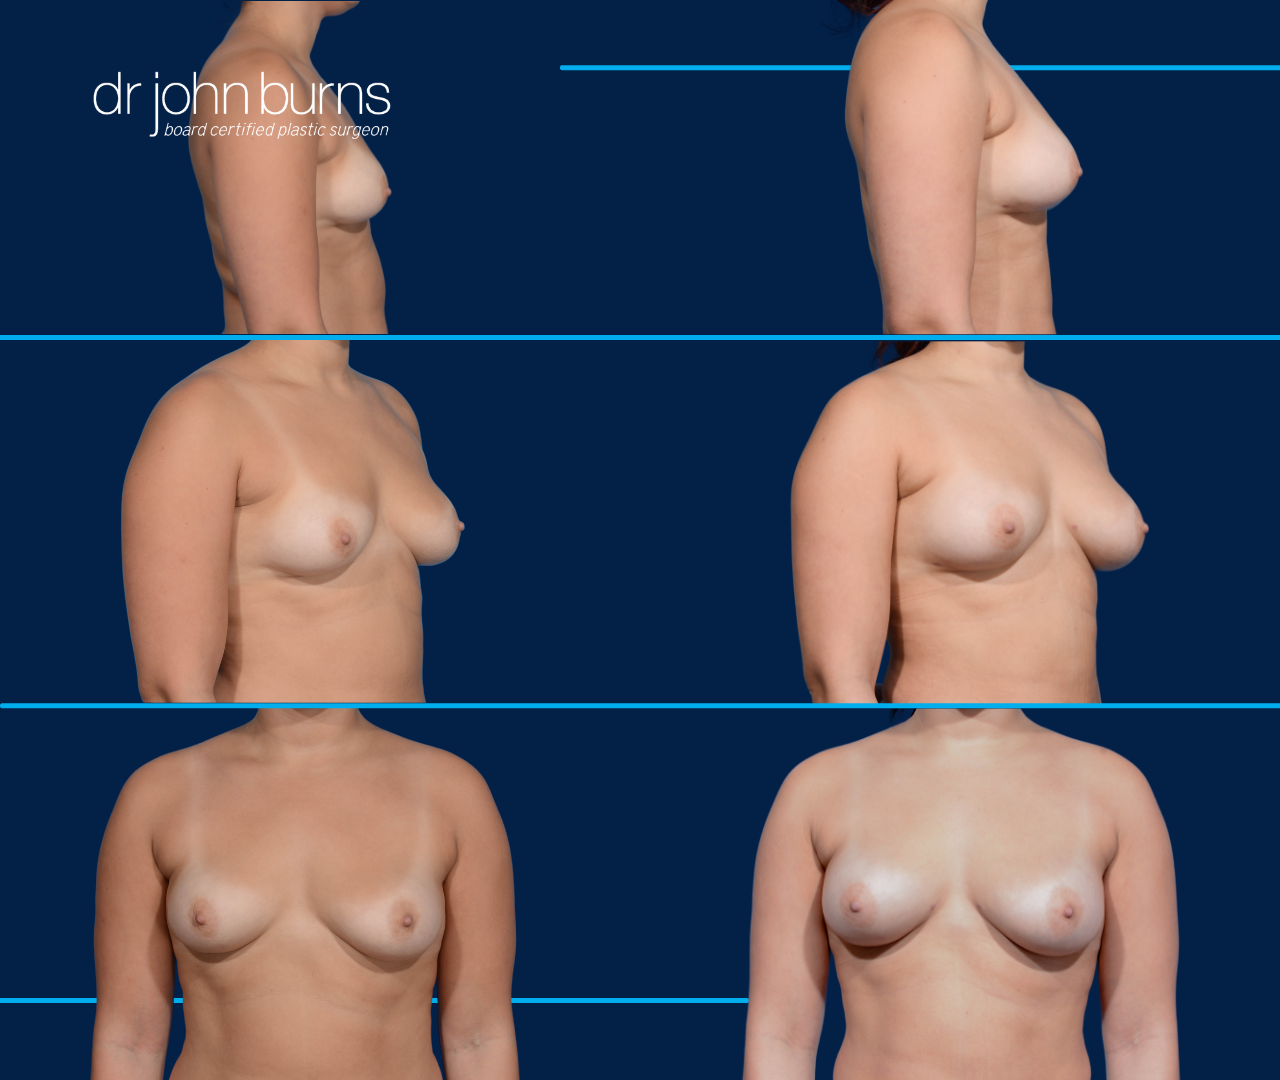 Fat Transfer to Breasts, 500cc per breast, by Dr. John Burns